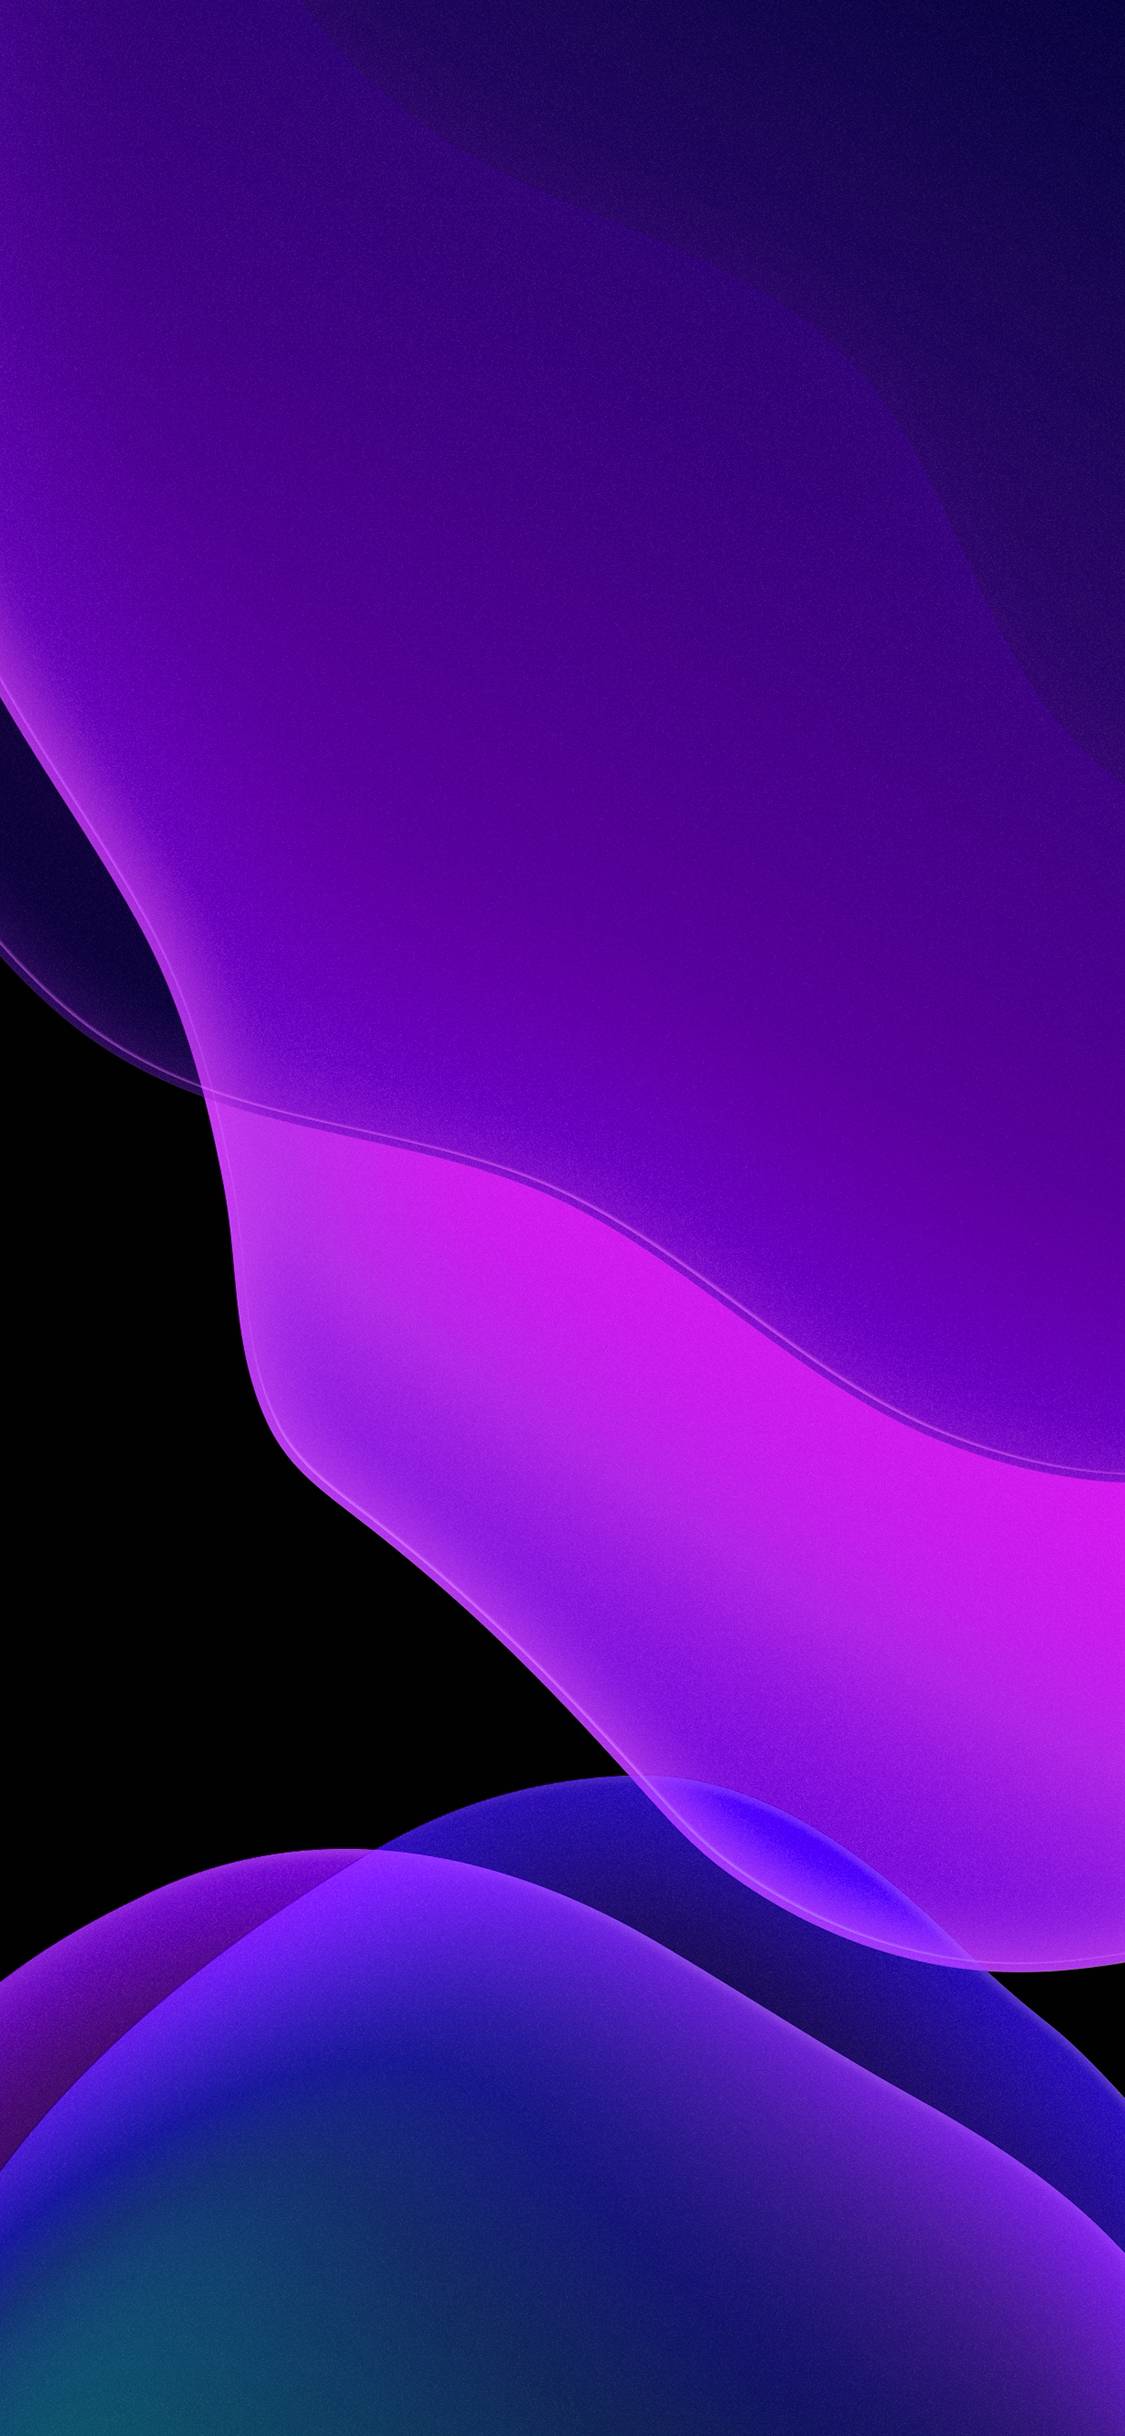 iPhone iOS 13 Wallpapers - Wallpaper Cave